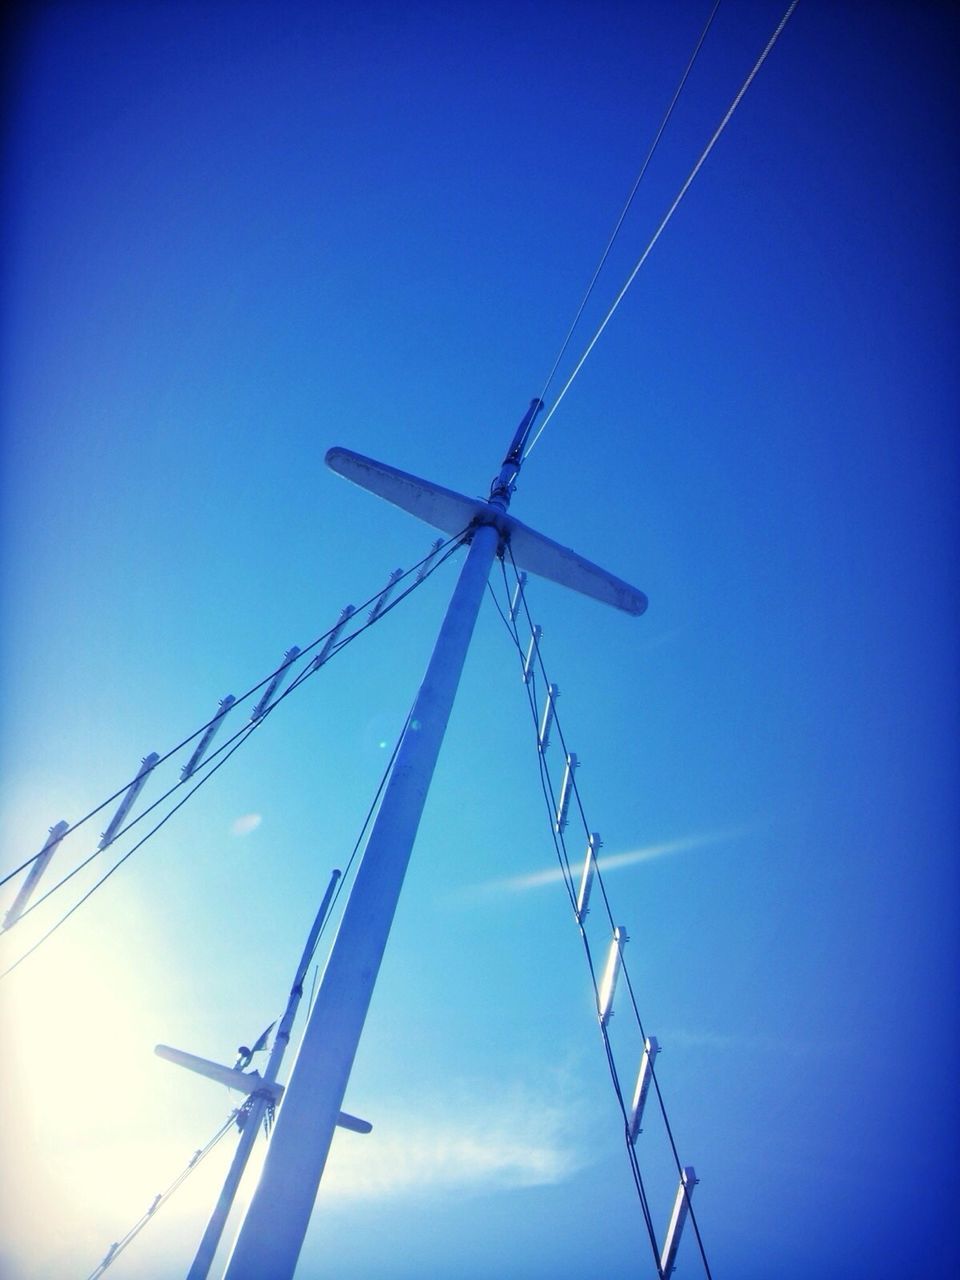 Low angle view of sailboat mast against clear blue sky